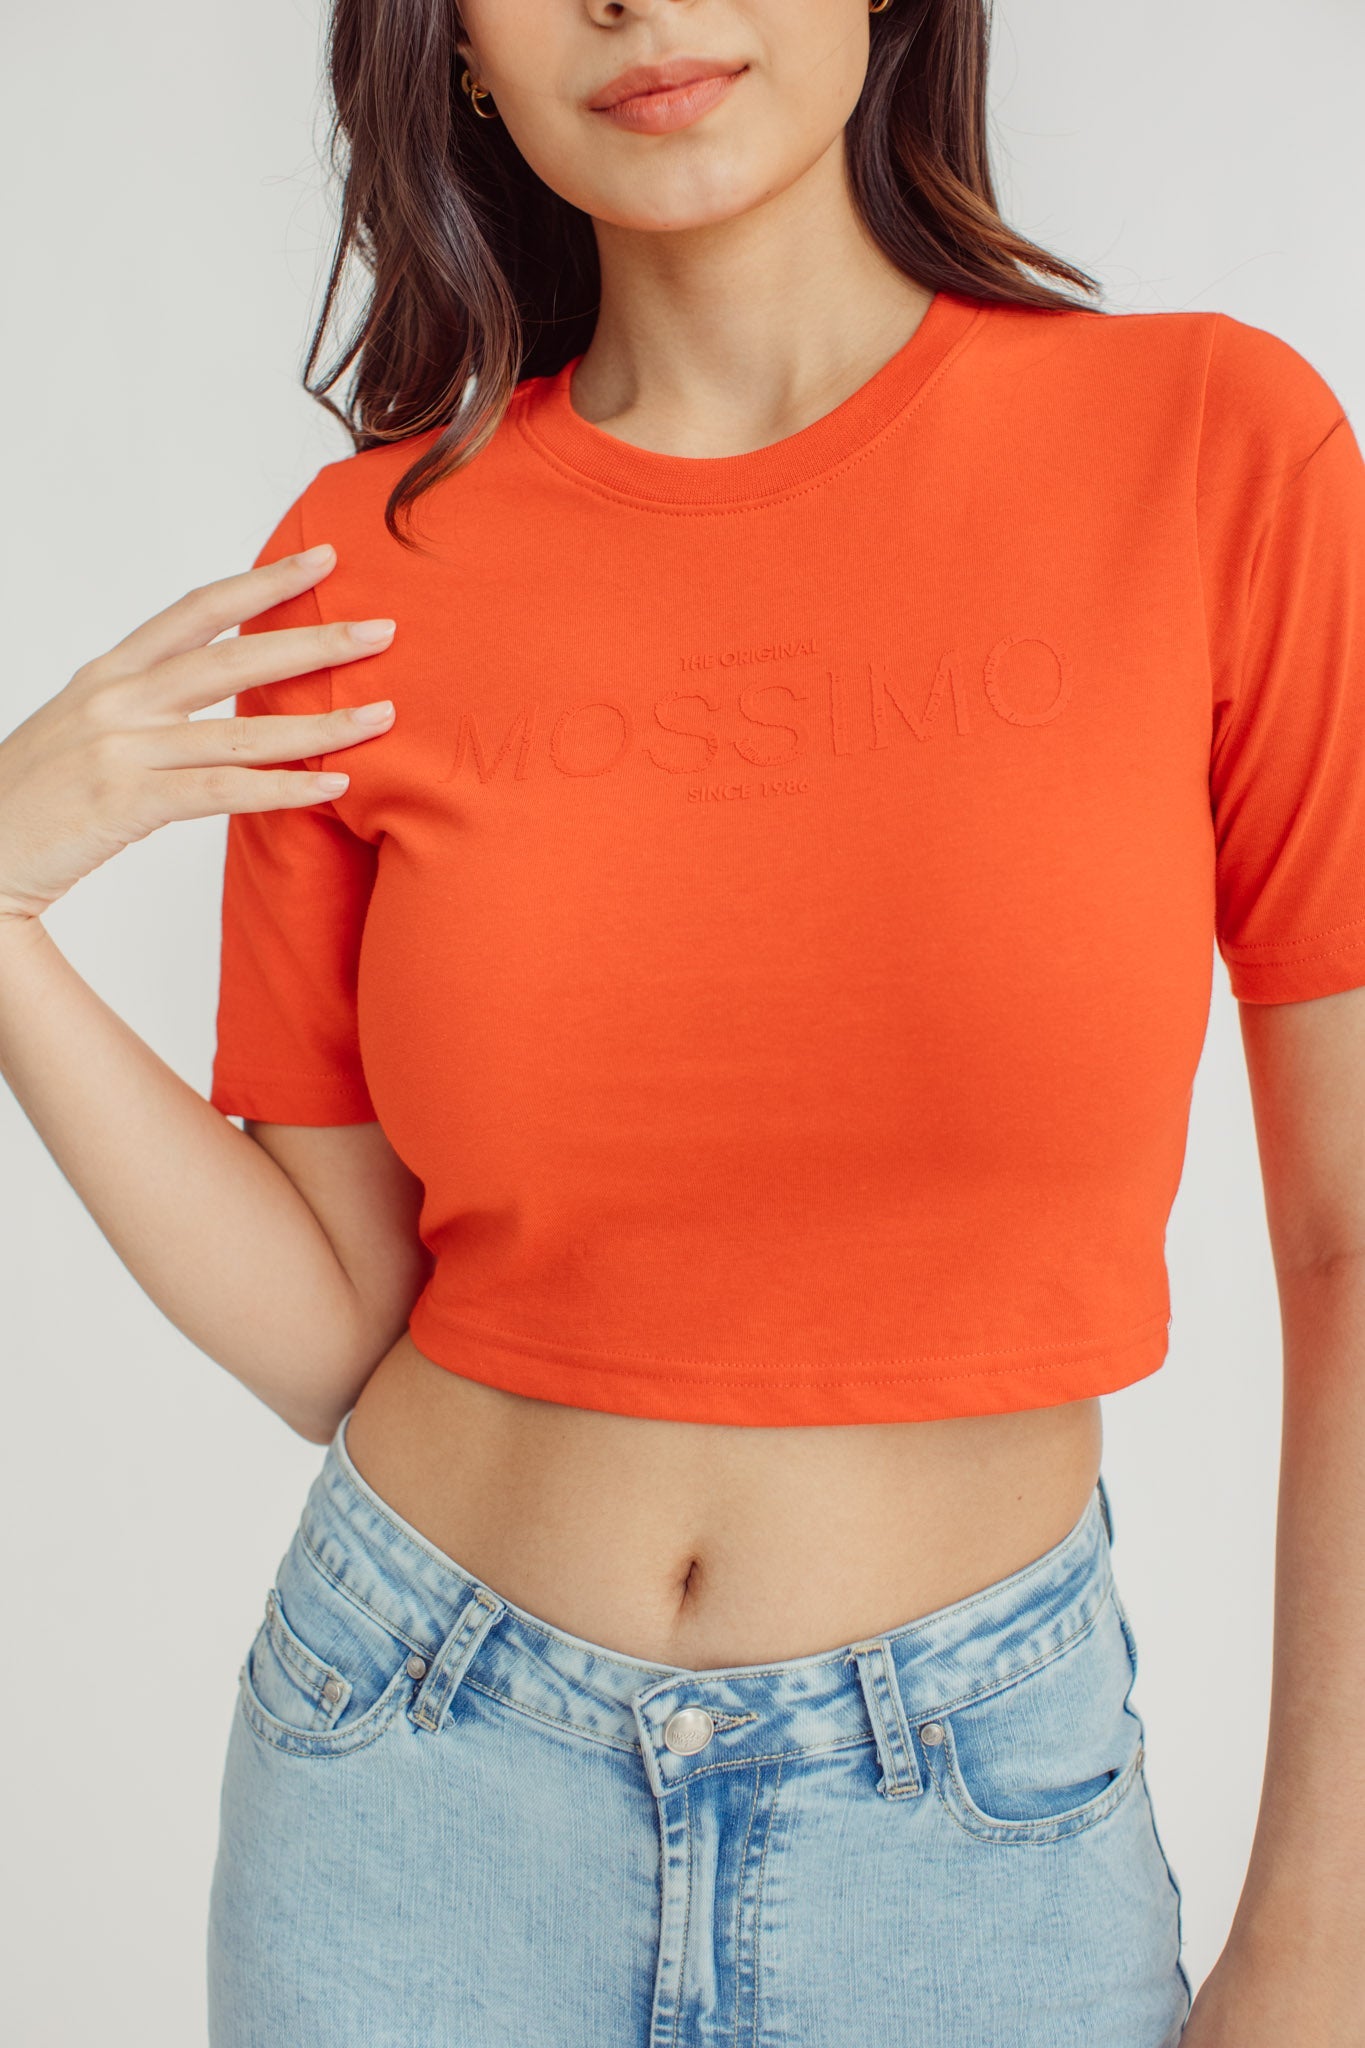 Retro Cropped Fit Tee with the Original Mossimo Thread Artwork - Mossimo PH